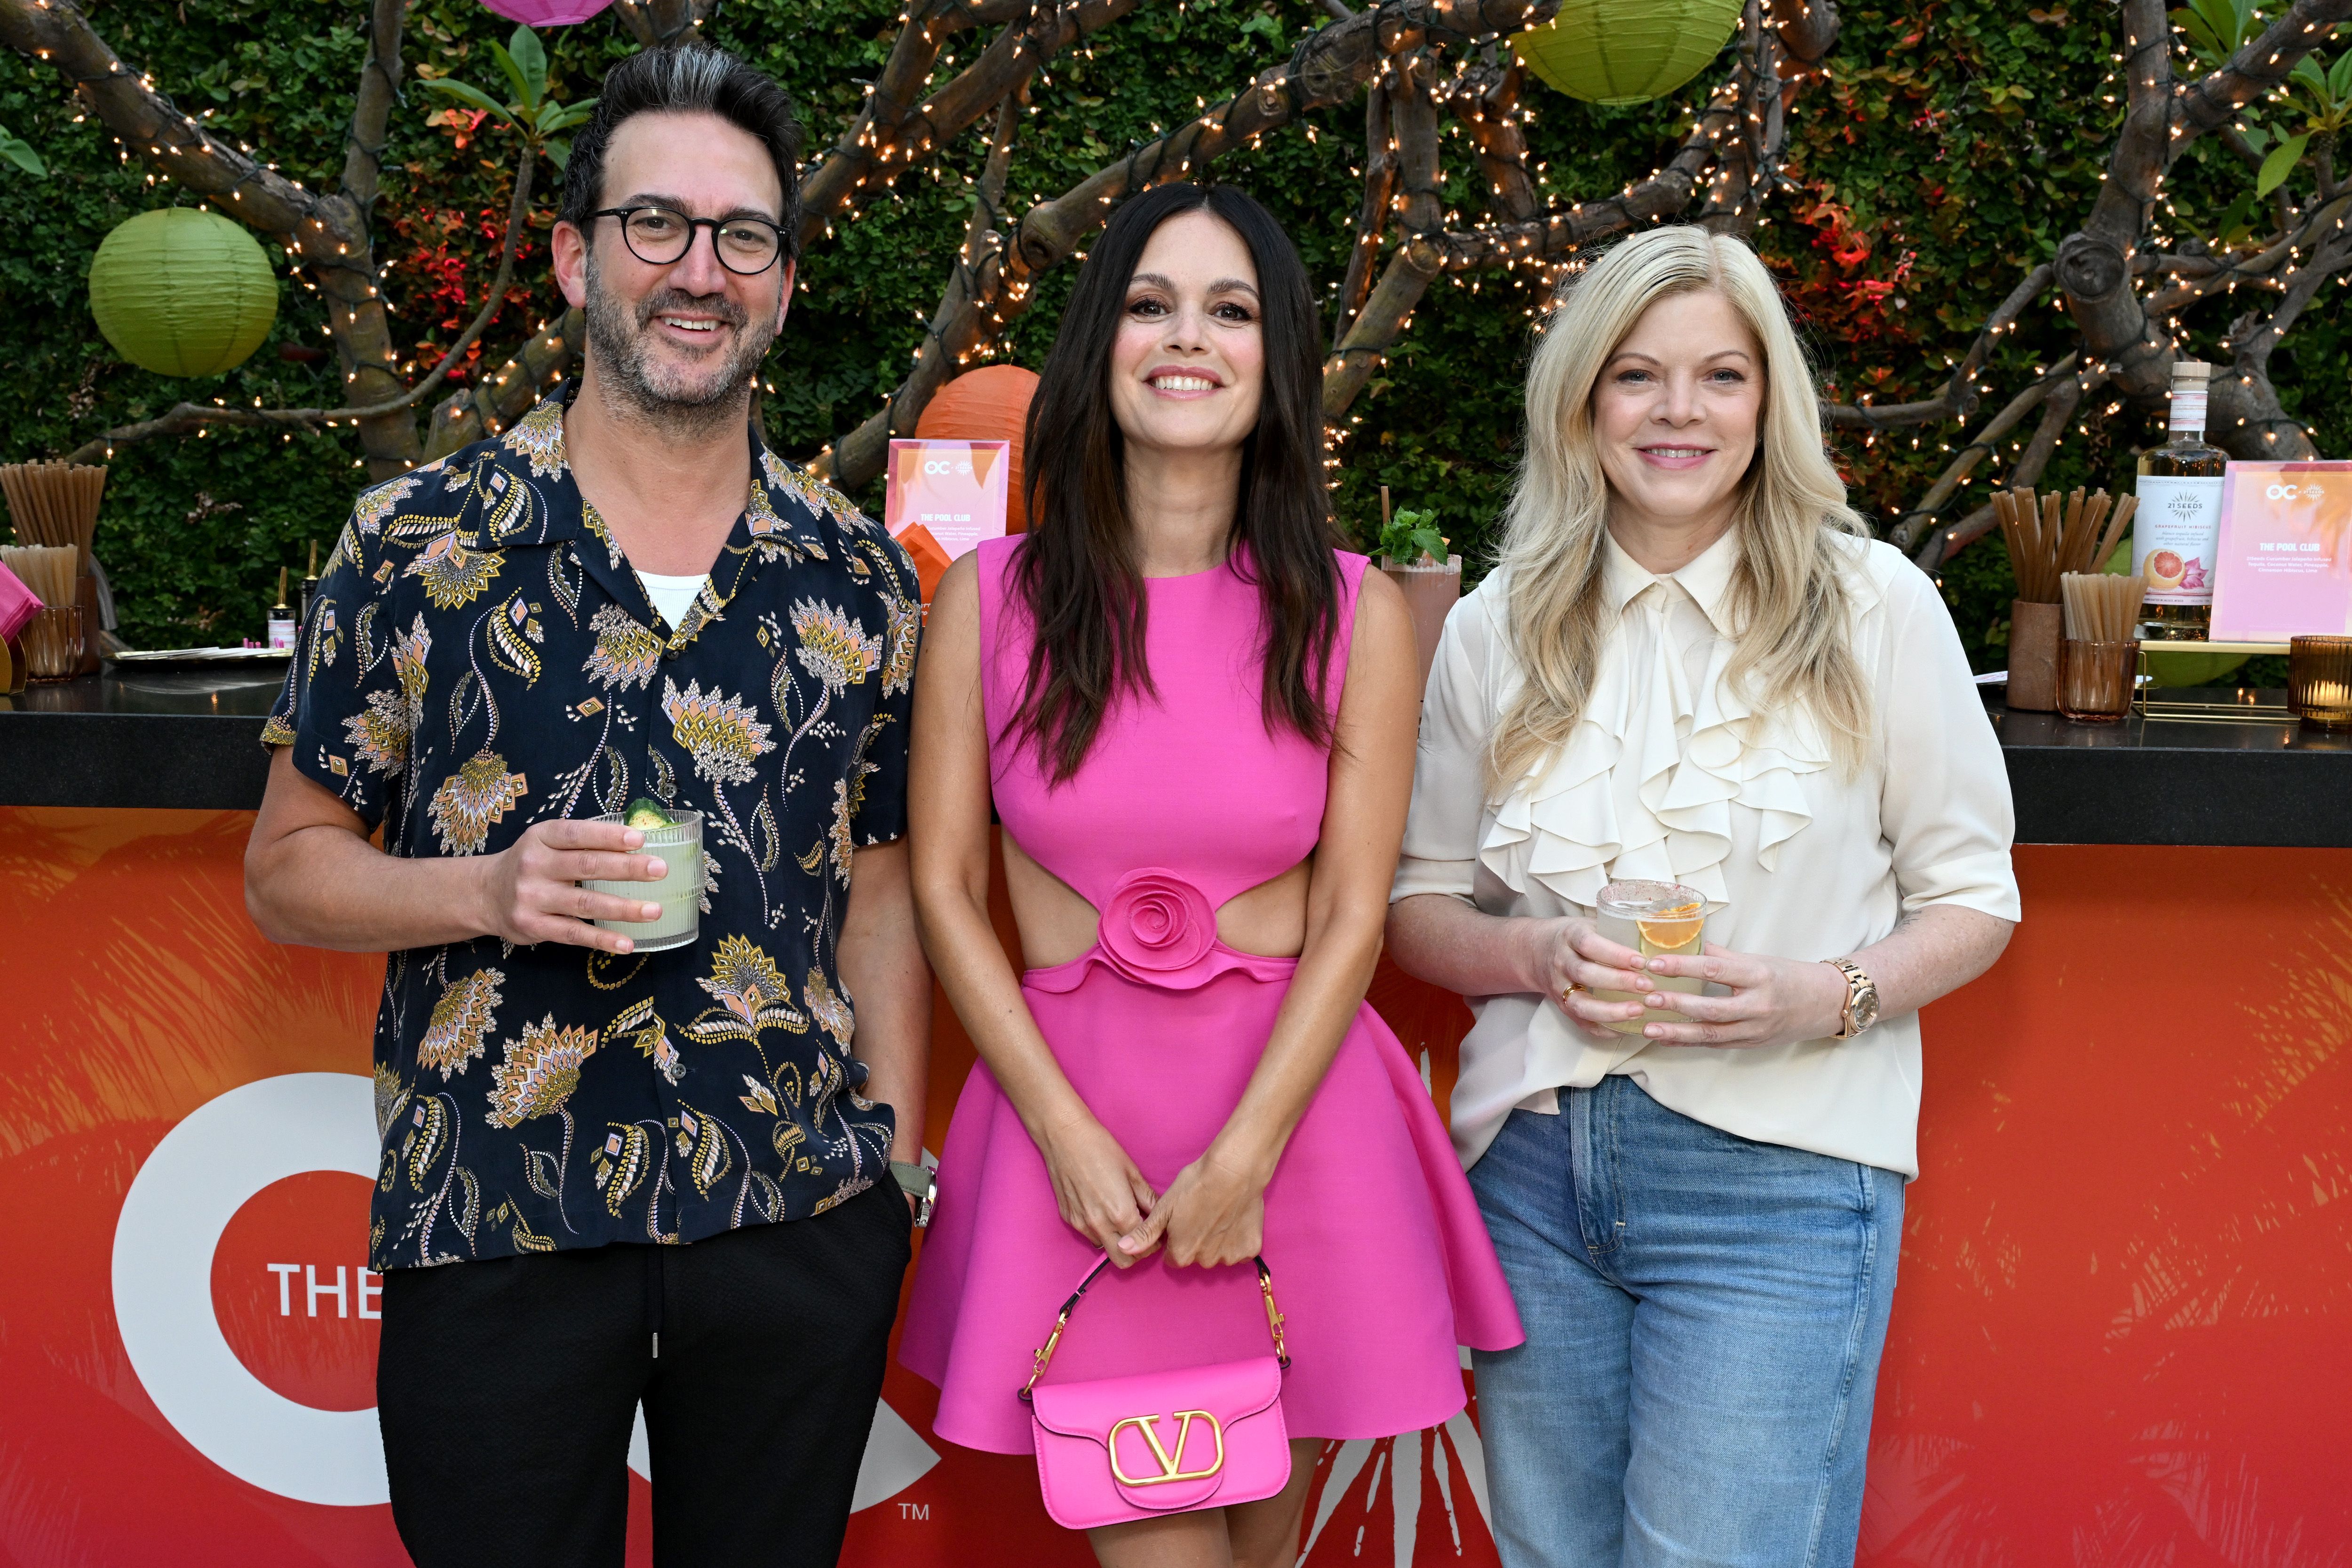 Rachel Bilson reunited with The OC's creators and producers - Josh Schwartz and Stephanie Savage at the event